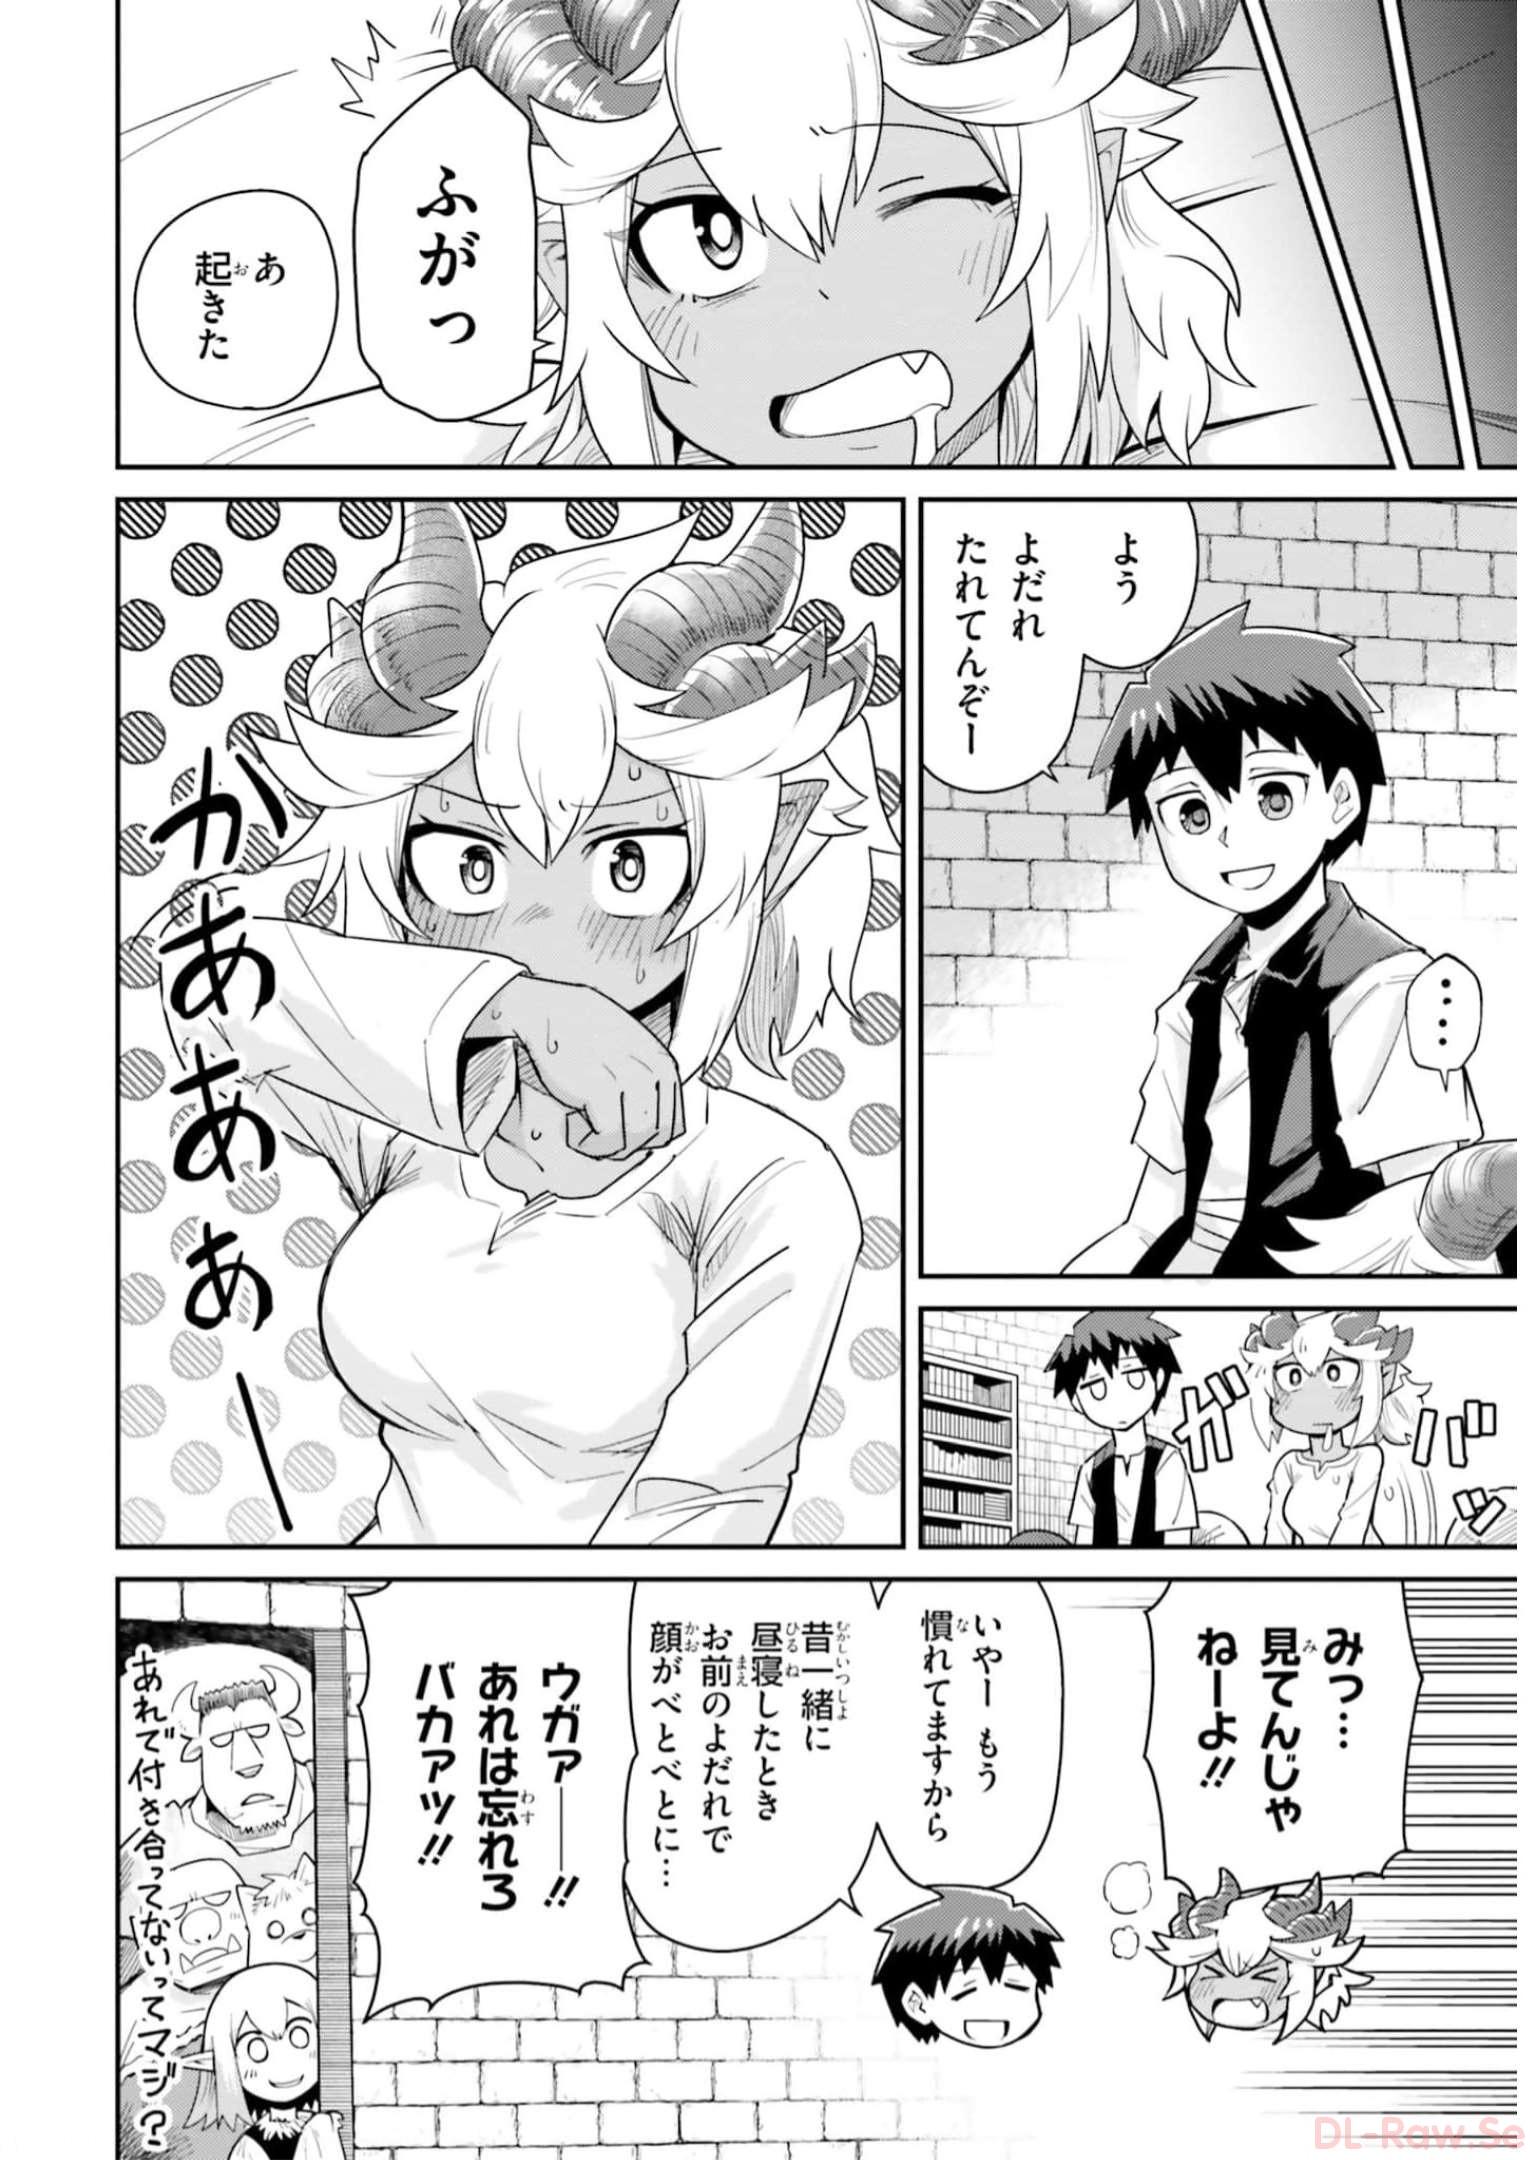 Dungeon Friends Forever Dungeon's Childhood Friend ダンジョンの幼なじみ 第18.1話 - Page 4